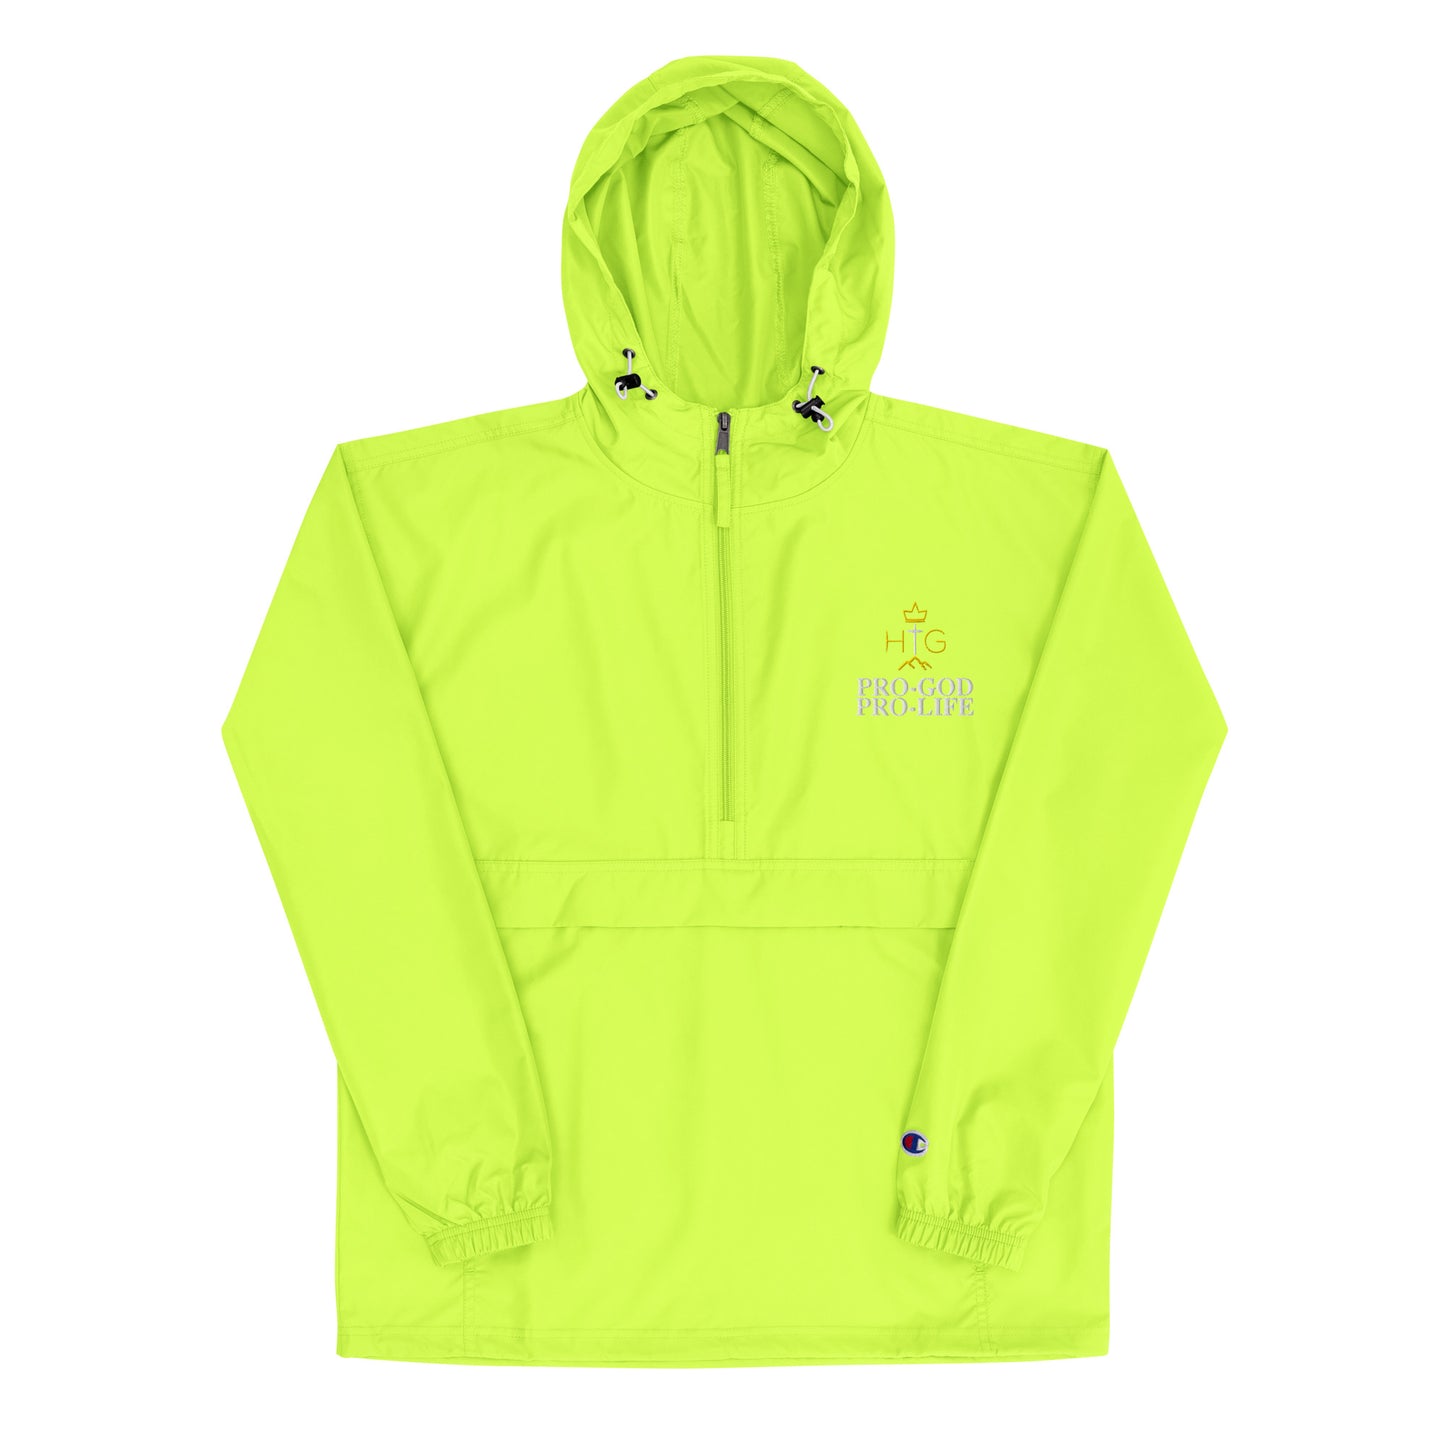 Pro God Pro Life - Logo Top - Embroidered Champion Packable Jacket